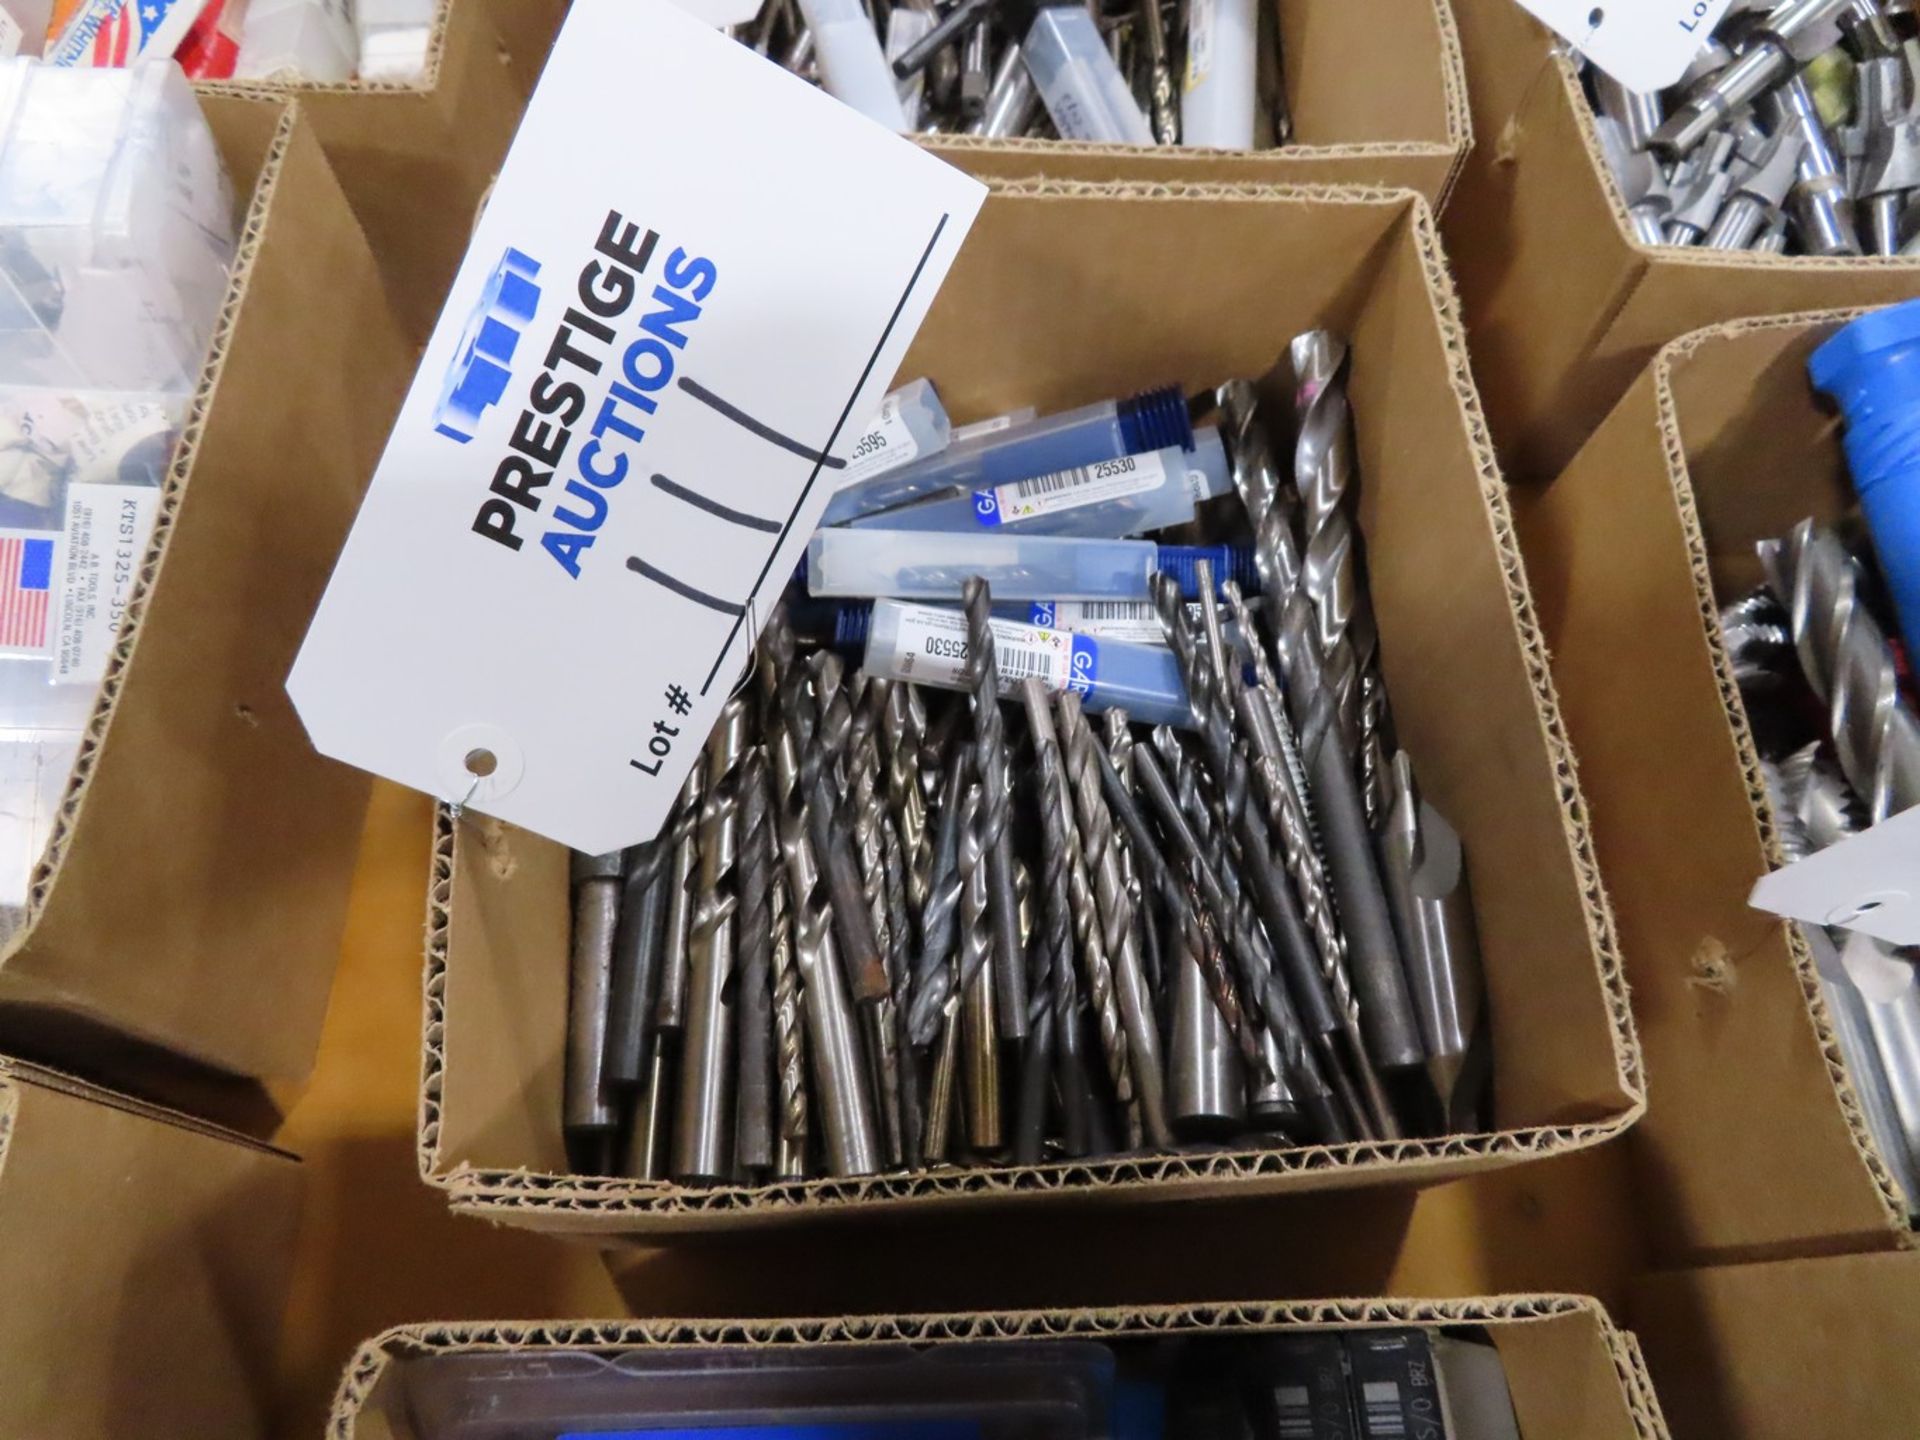 Lot of Assorted High Speed Drill Bits